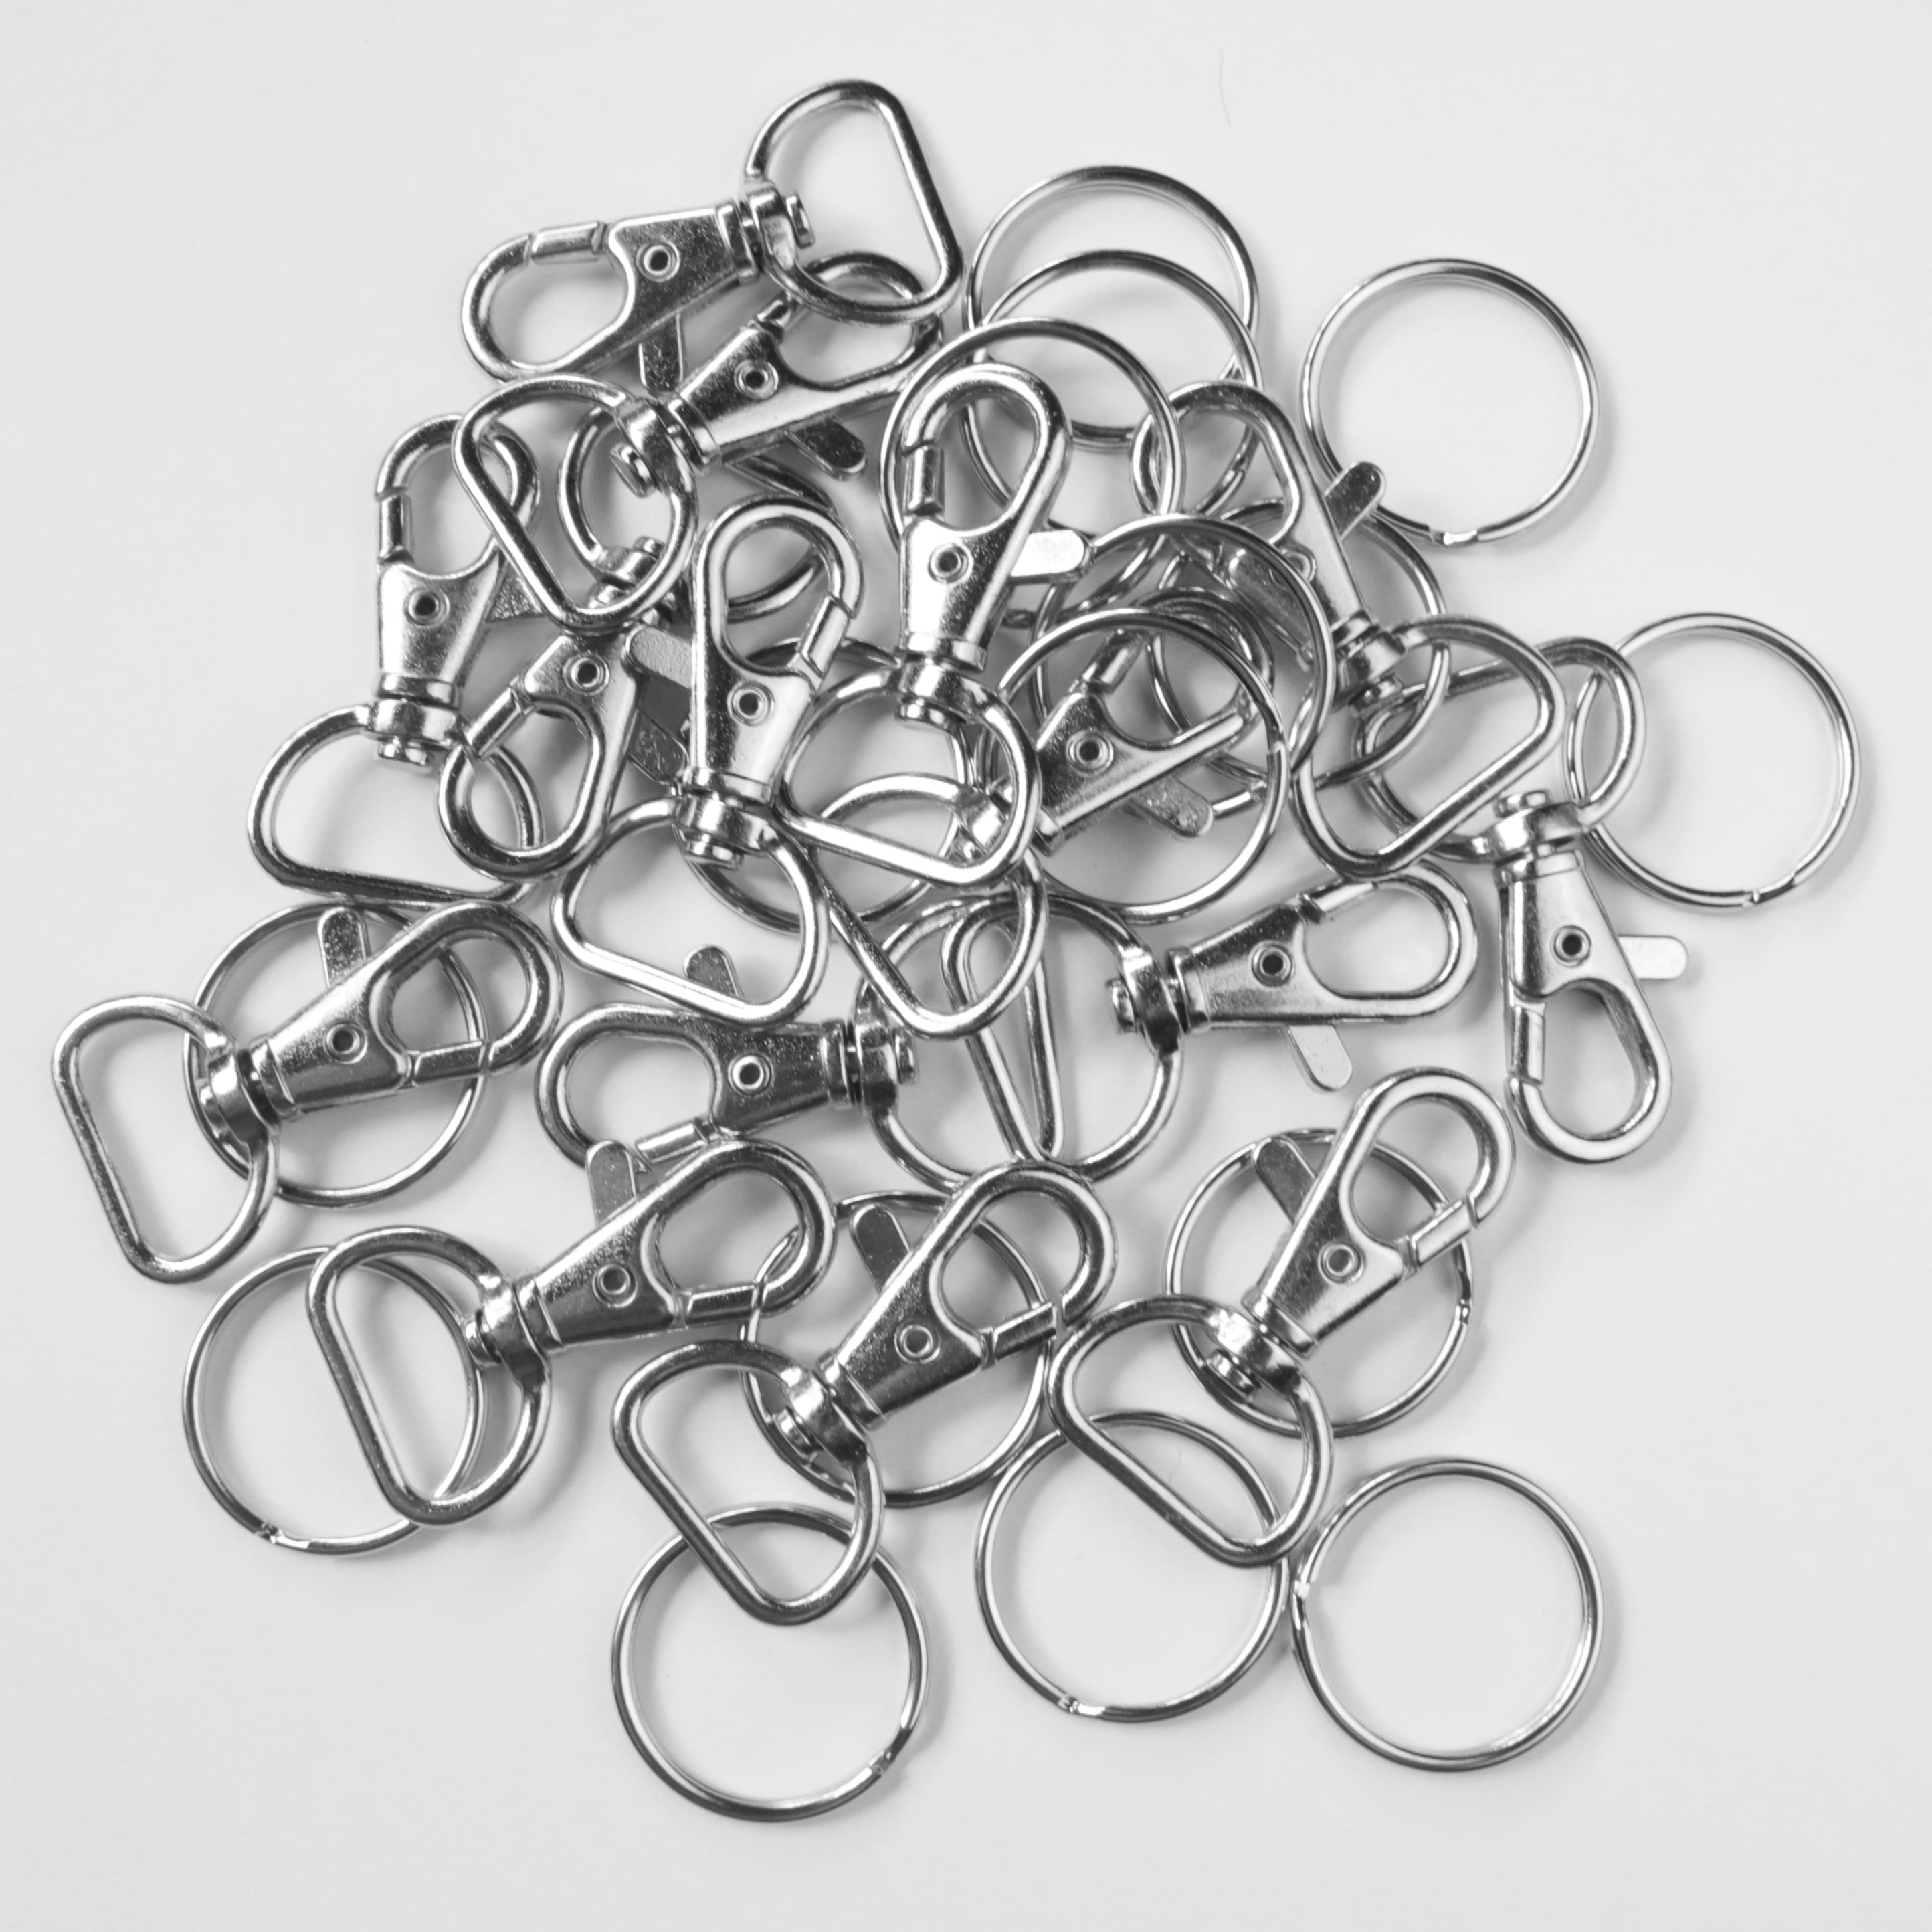 50 Pack Metal Swivel Clasps Lobster Claw Clasp Lanyard Snap Hook 1 5/8” x  1” (Wide 3/4” D Ring) with 50 Key Rings - Jewelry Findings Or Sewing  Projects … 